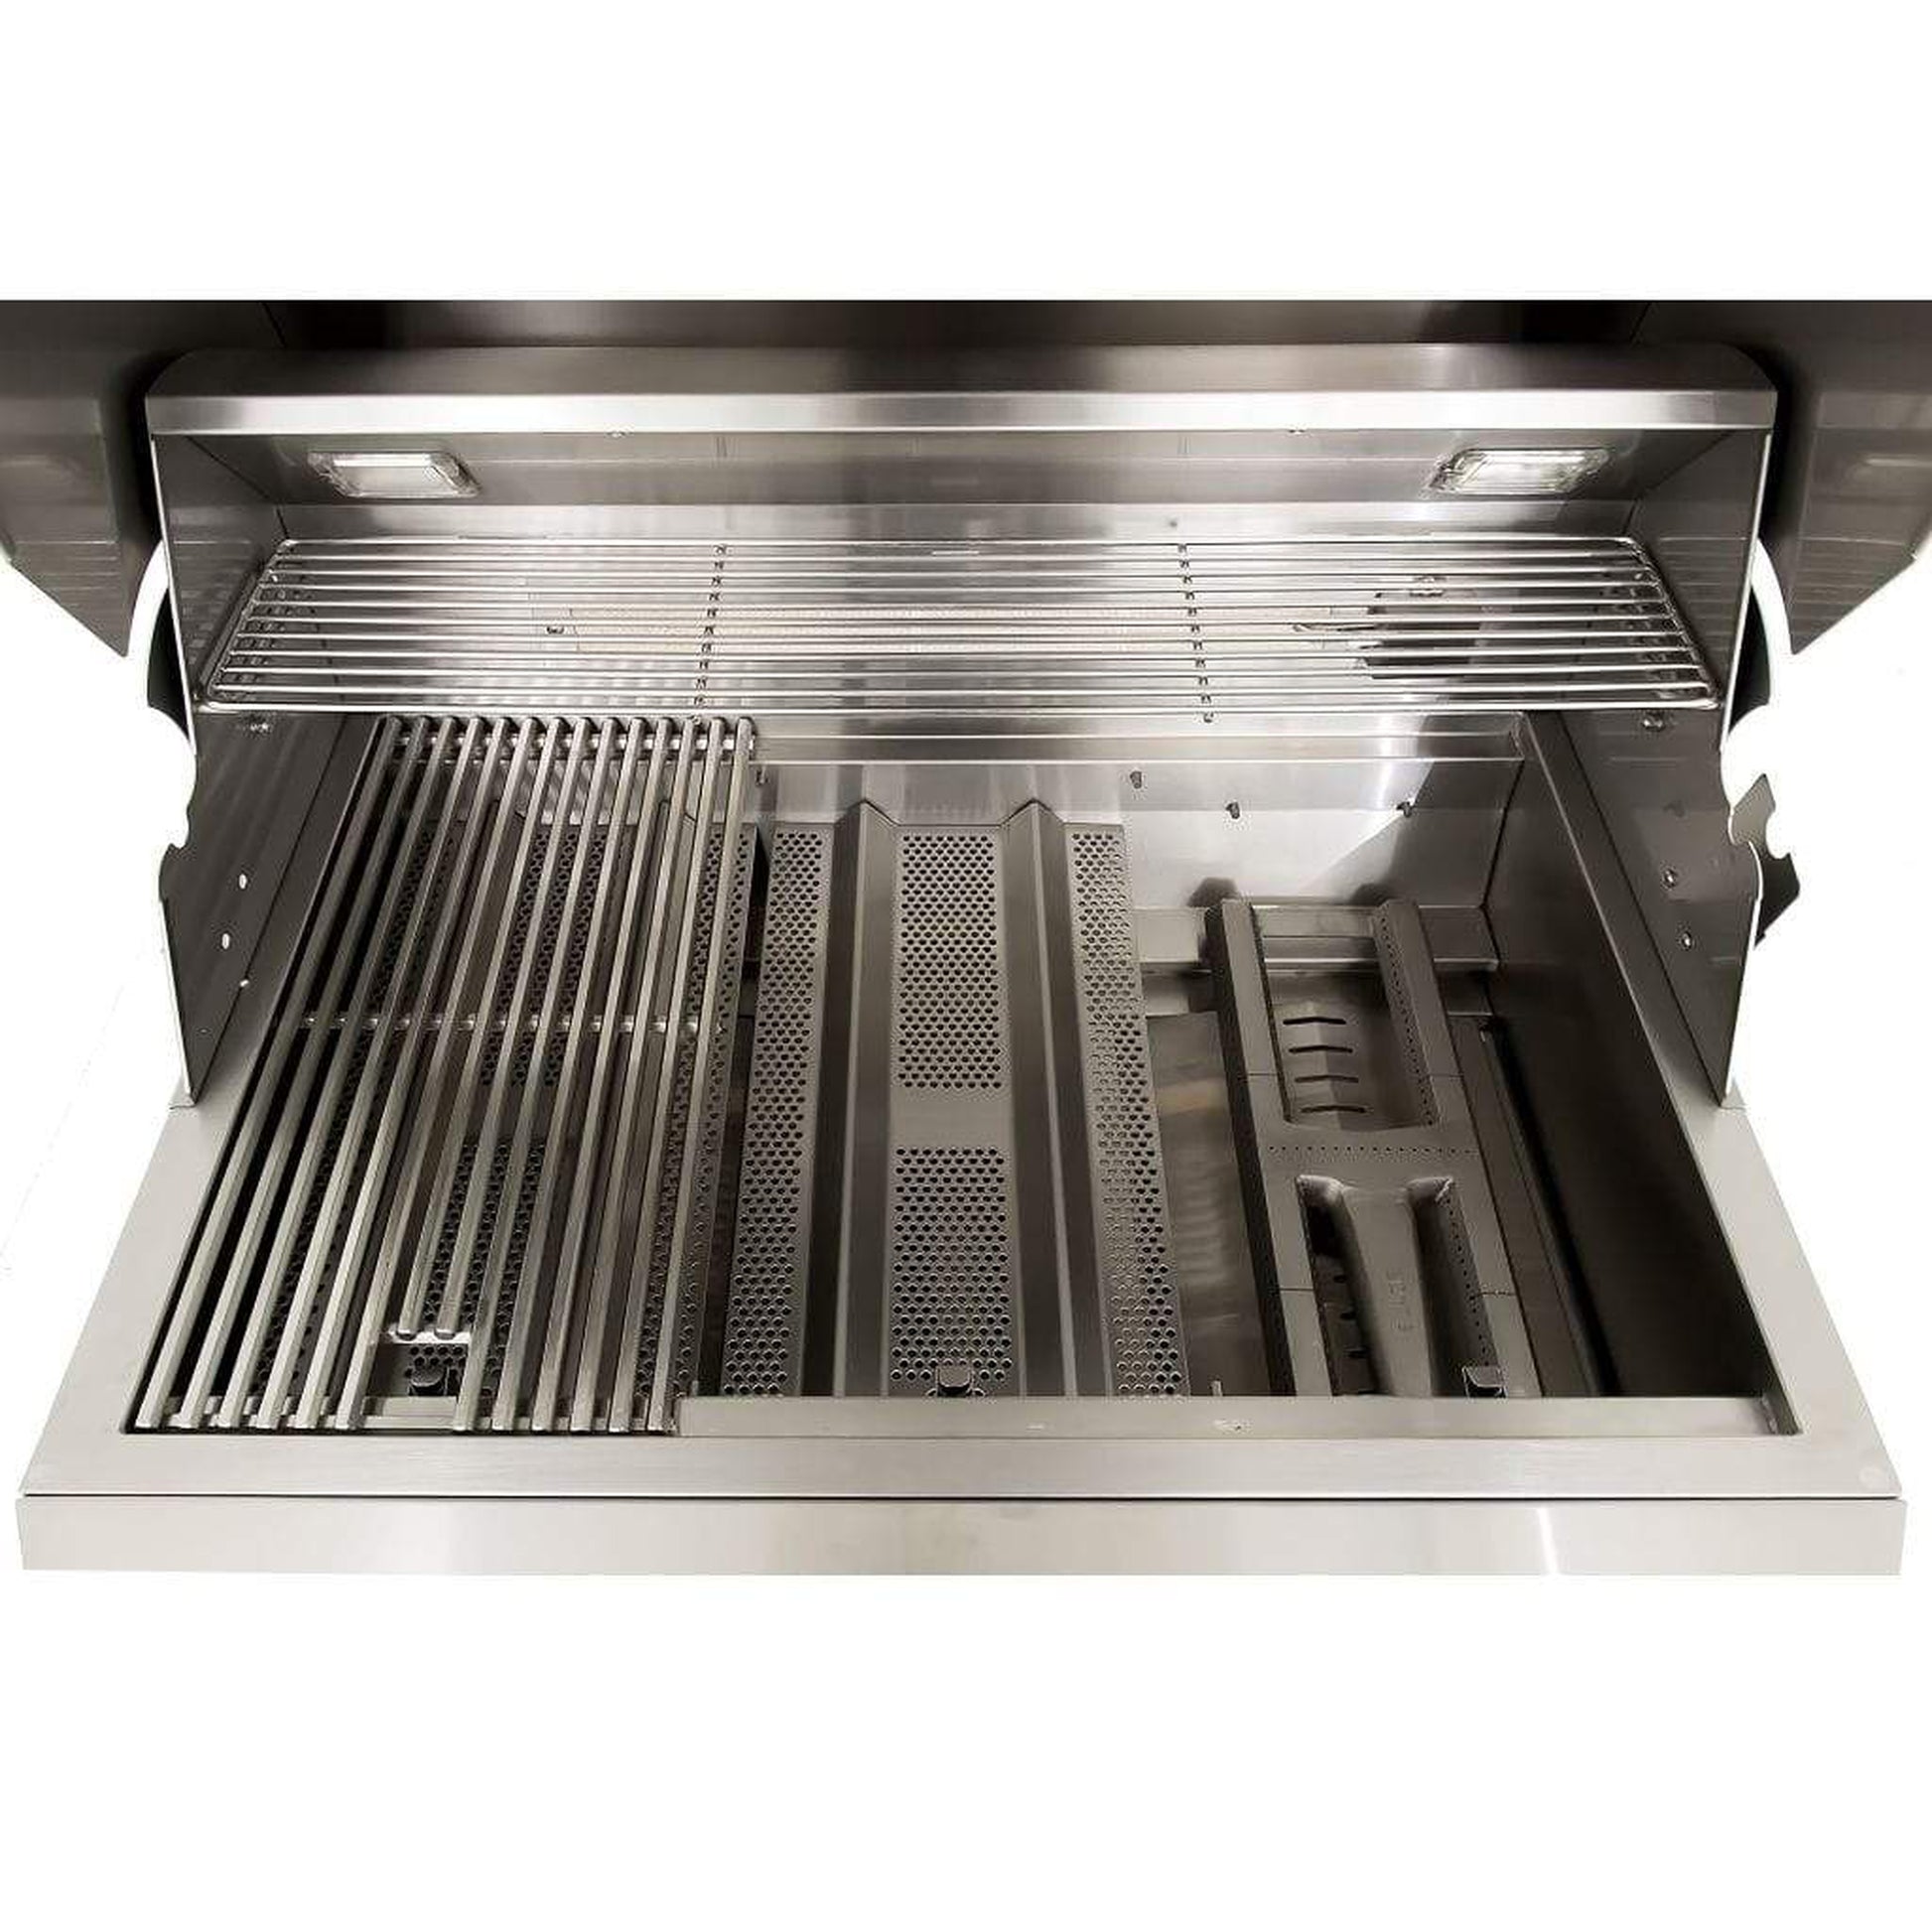 Blaze Professional LUX 34" 3-Burner Built-In Gas Grill with Rear Infrared Burner